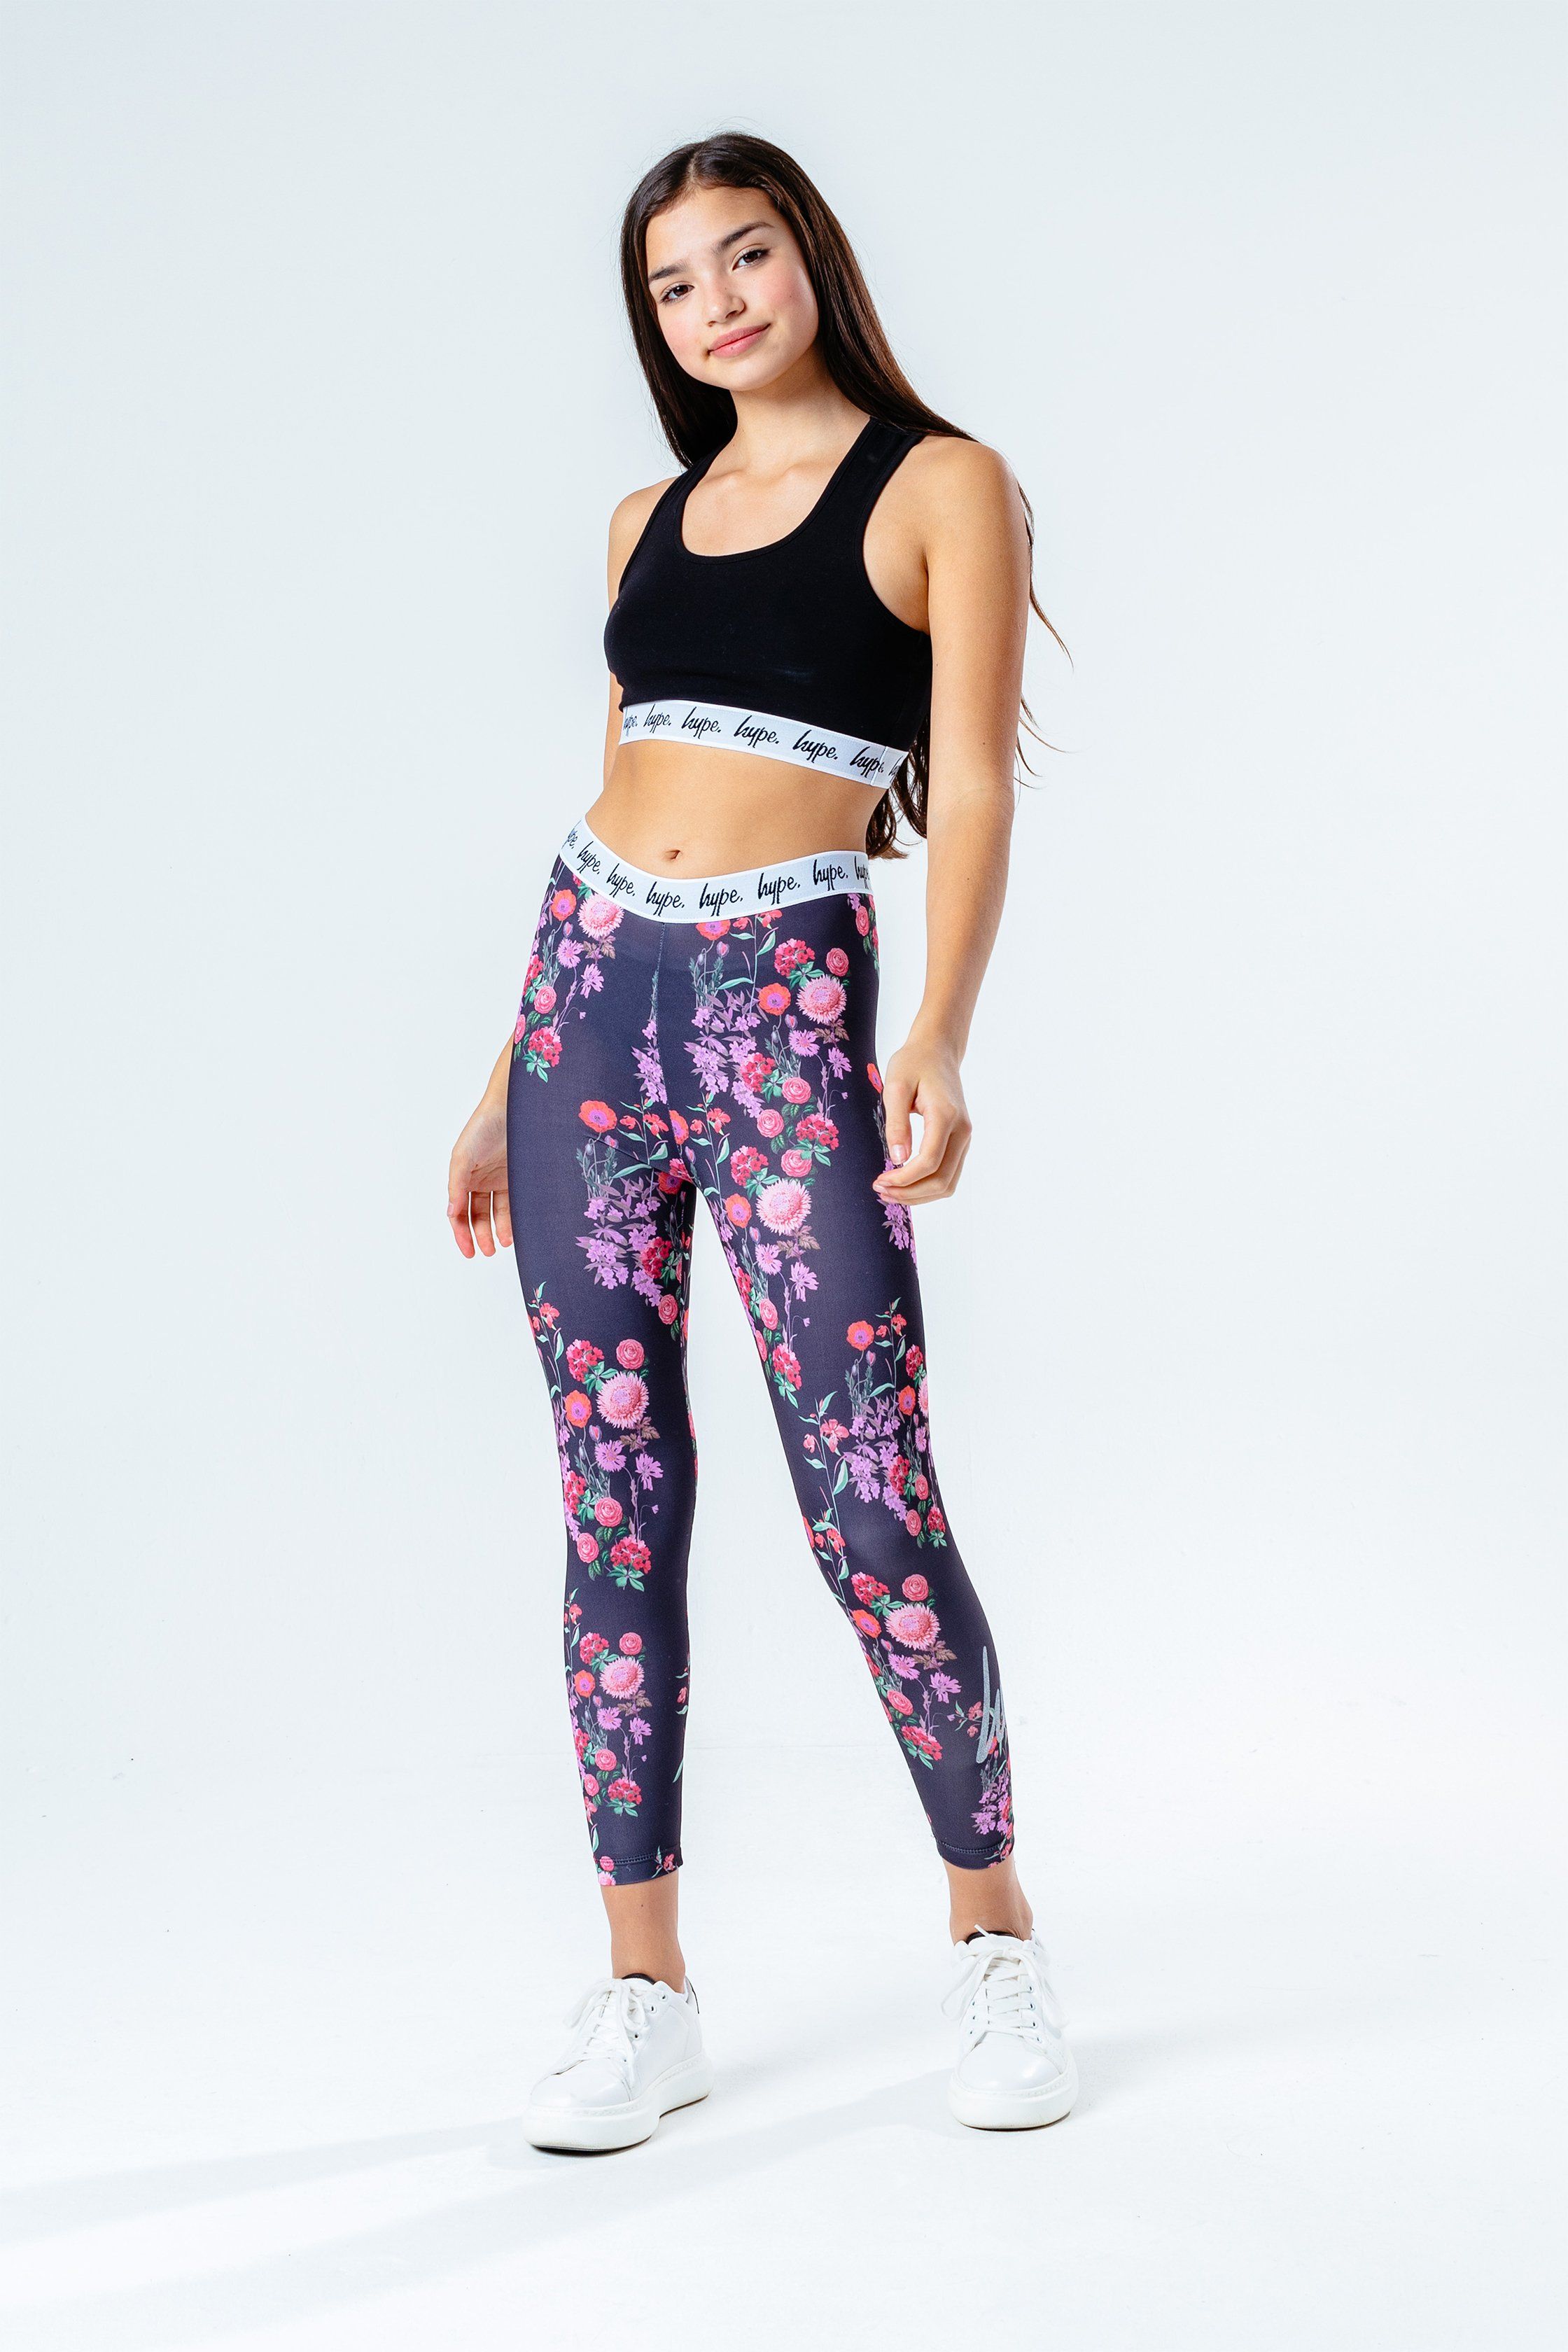 The HYPE. Ditsy Floral Kids Leggings are perfect to add to your everyday rotation. In a pink, peach, green and black colour palette in our standard kids legging shape. With an embossed monochrome elasticated waistband in a micro poly fabric for the ultimate comfort. Boasting an all-over floral print. Finished with the iconic HYPE. script logo in a  glitter transfer. Wear the matching kids crop tee to complete the look. Machine wash at 30 degrees.